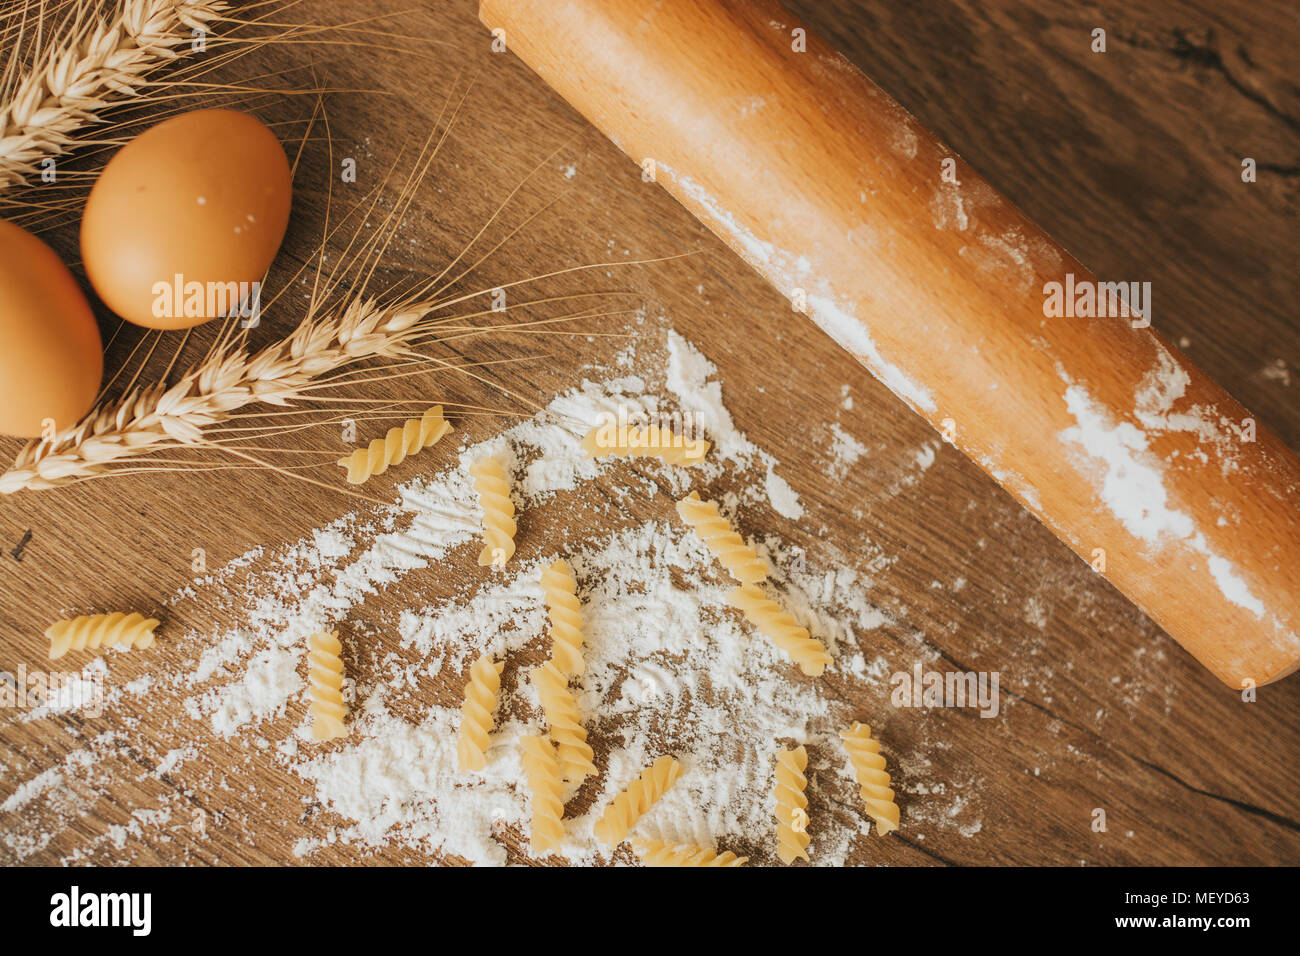 Pasta eggs kitchen accessories on a wooden background. Stock Photo